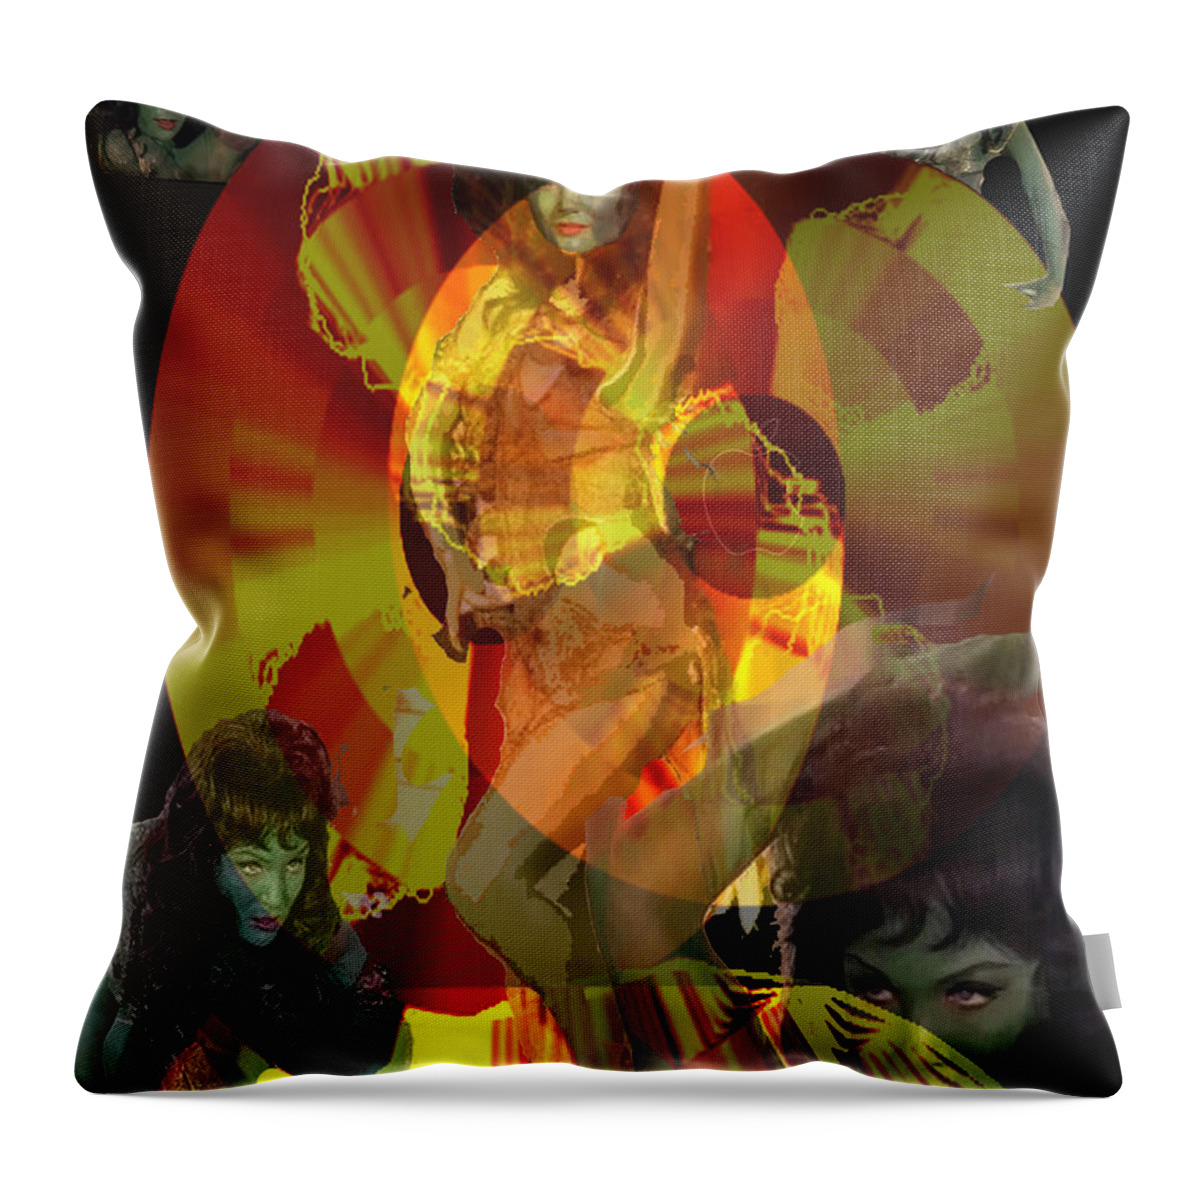 Jealousy Throw Pillow featuring the digital art Jealousy by Seth Weaver